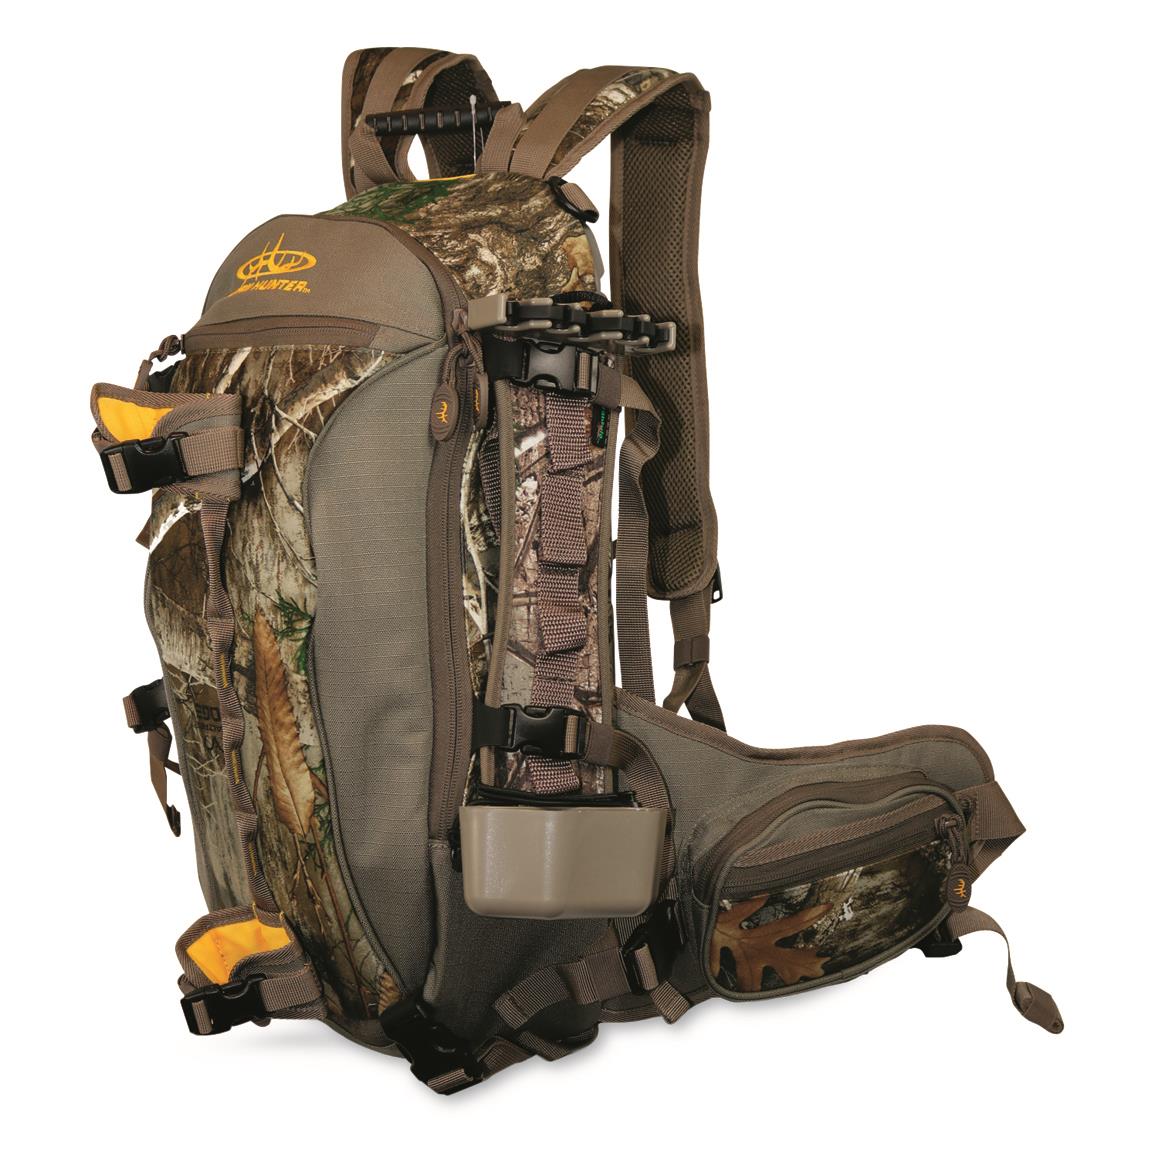 Horn Hunter G2 Daypack with MAQ Quiver, Realtree Xtra Camo